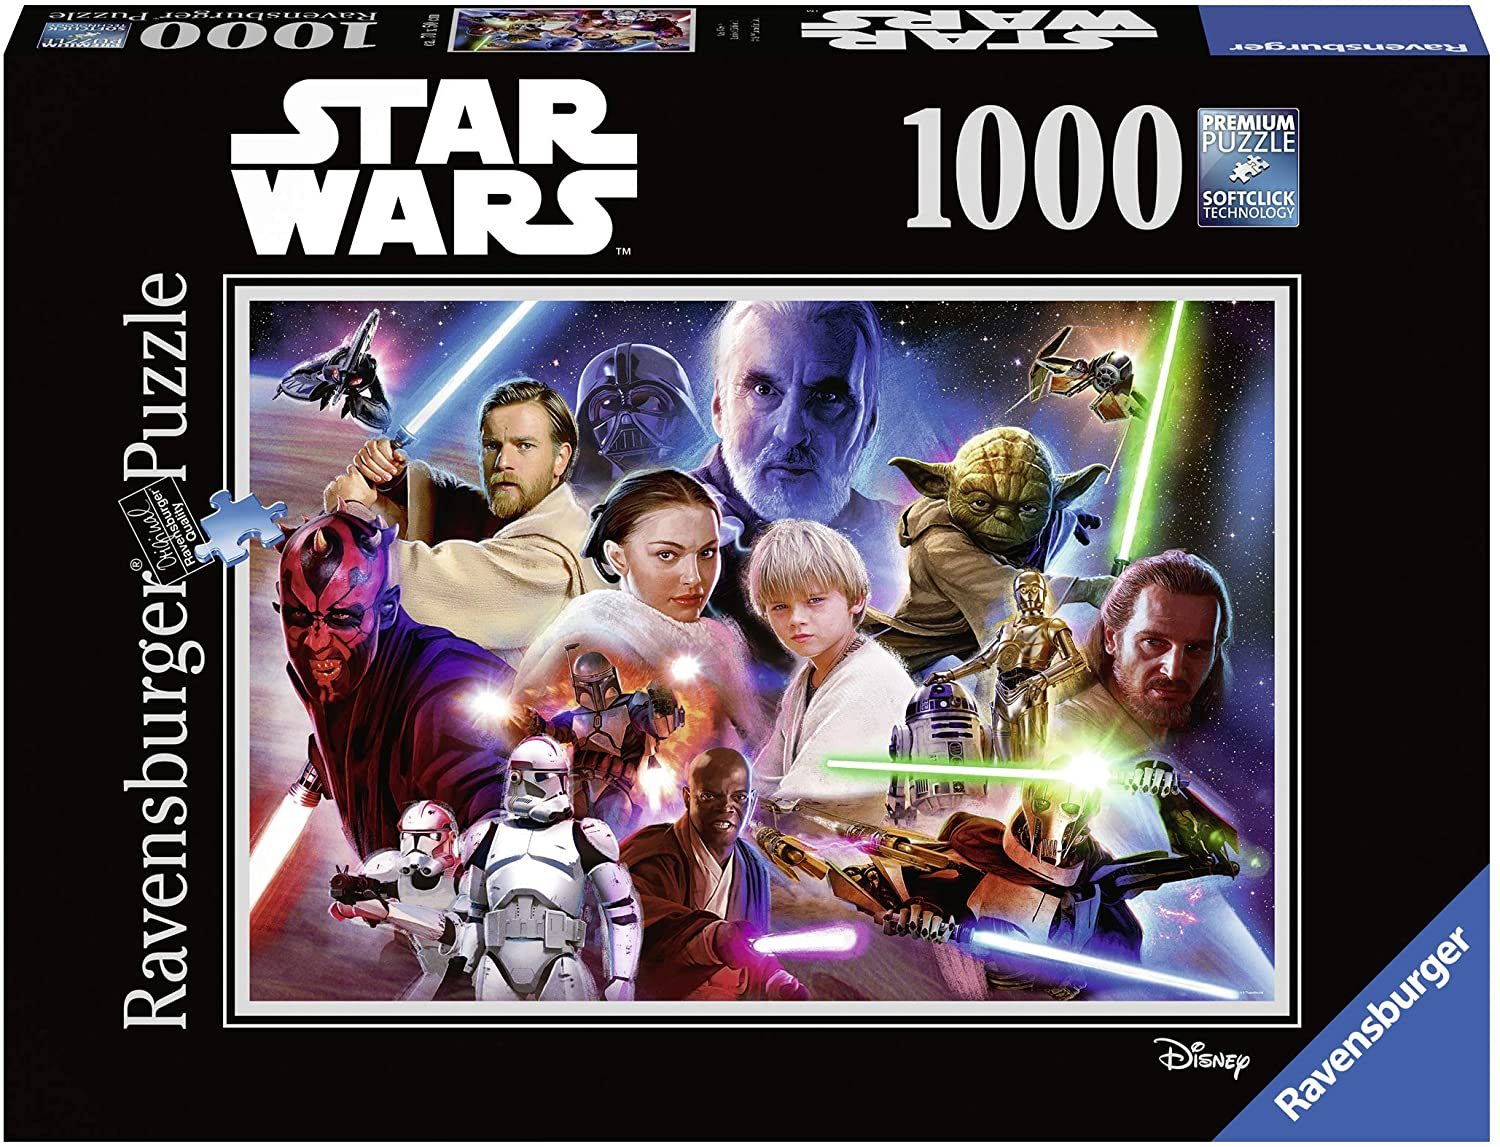 https://www.thepuzzlecollections.com/wp-content/uploads/2021/10/ravensburger-star-wars-1.jpg